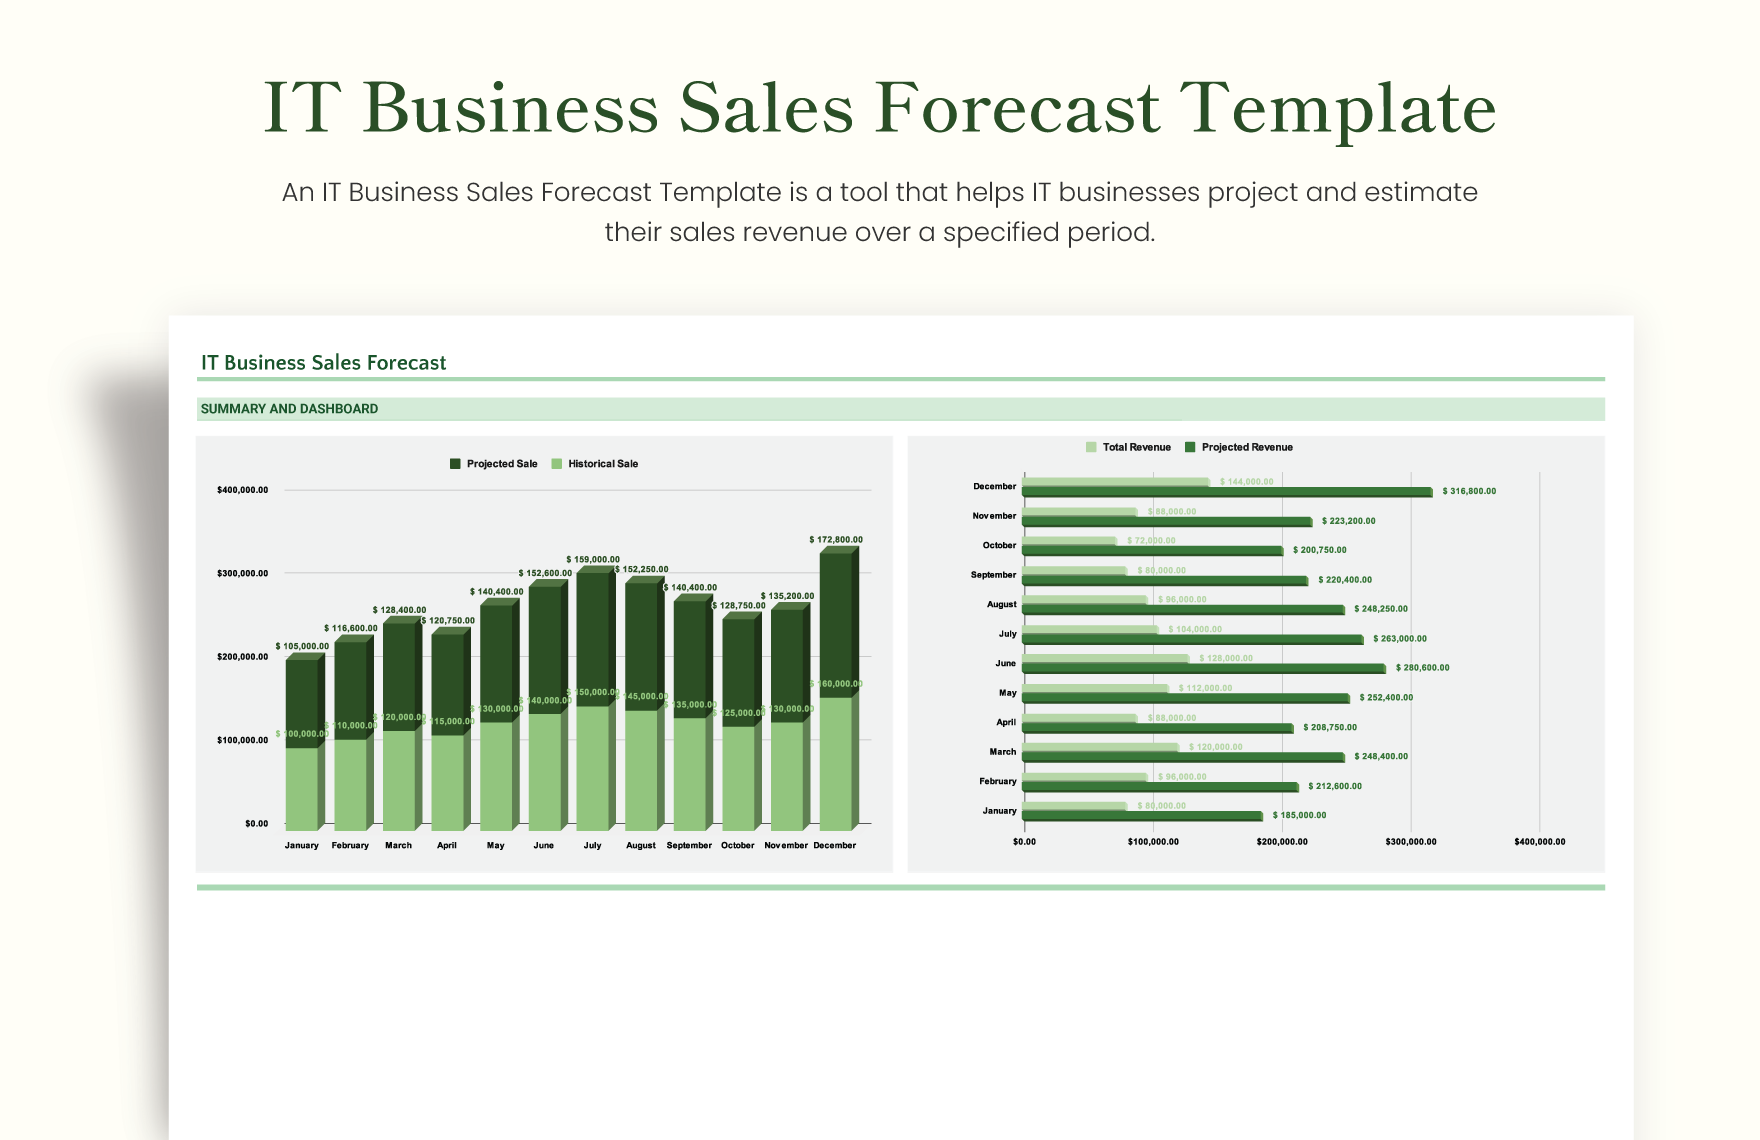 IT Business Sales Forecast Template